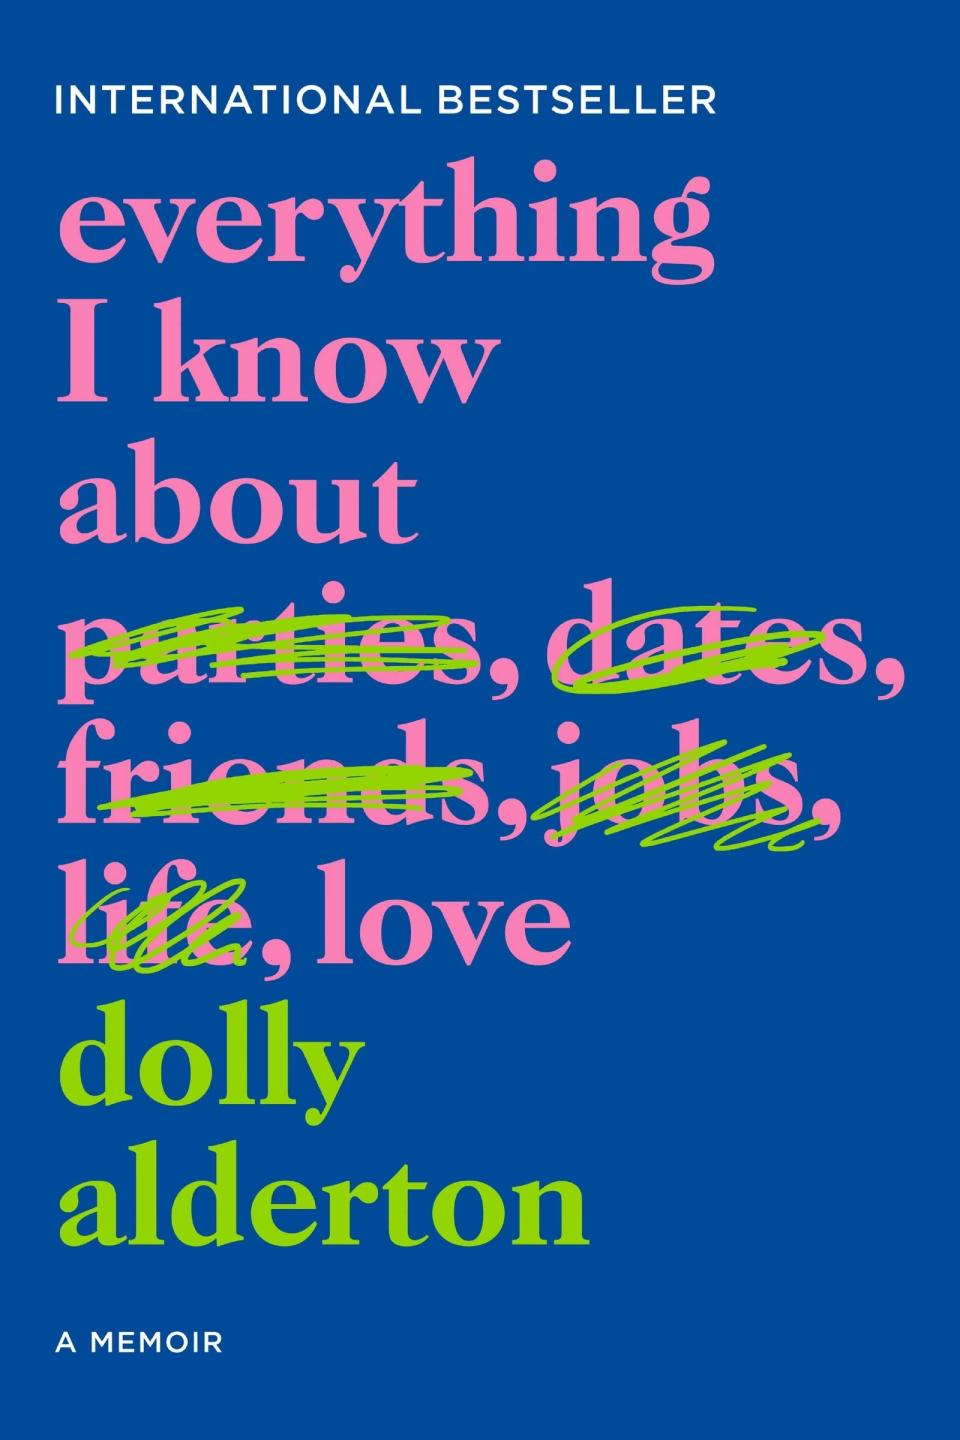 The cover of "Everything I Know About Love" by Dolly Alderton.